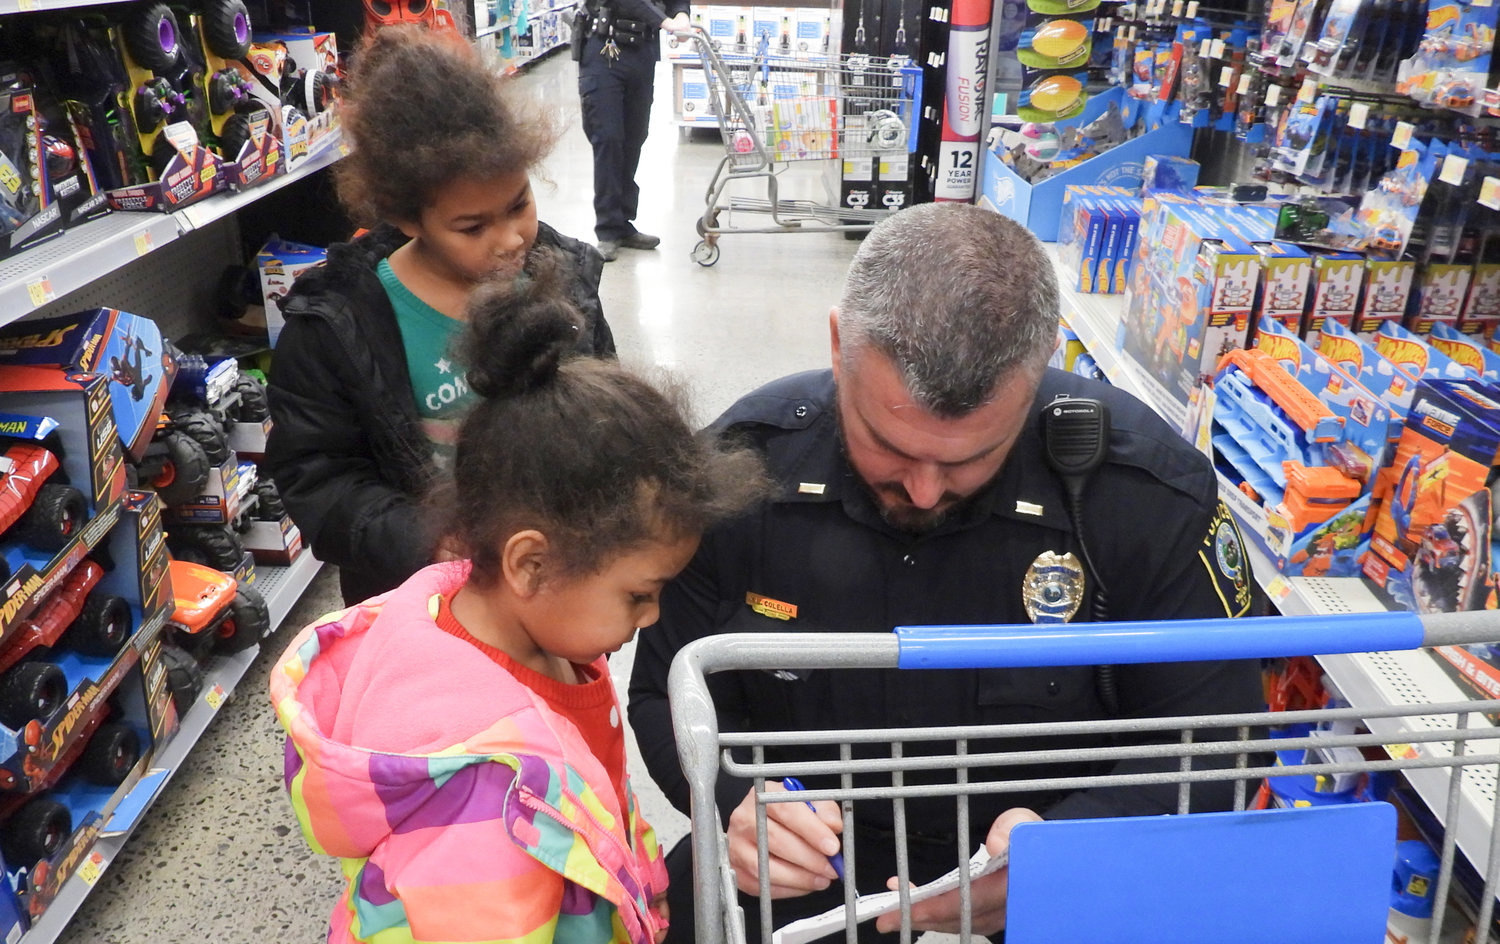 Lieutenant Matt Colella checks over the list of five-year-old Natalia Wallace (in pink) at the Oneida Police Department's Shop with a Cop event on Saturday, Dec. 10, while seven-year-old Tatiana Irvin looks on. Around 86 children were brought into Walmart on Saturday for a shopping spree.